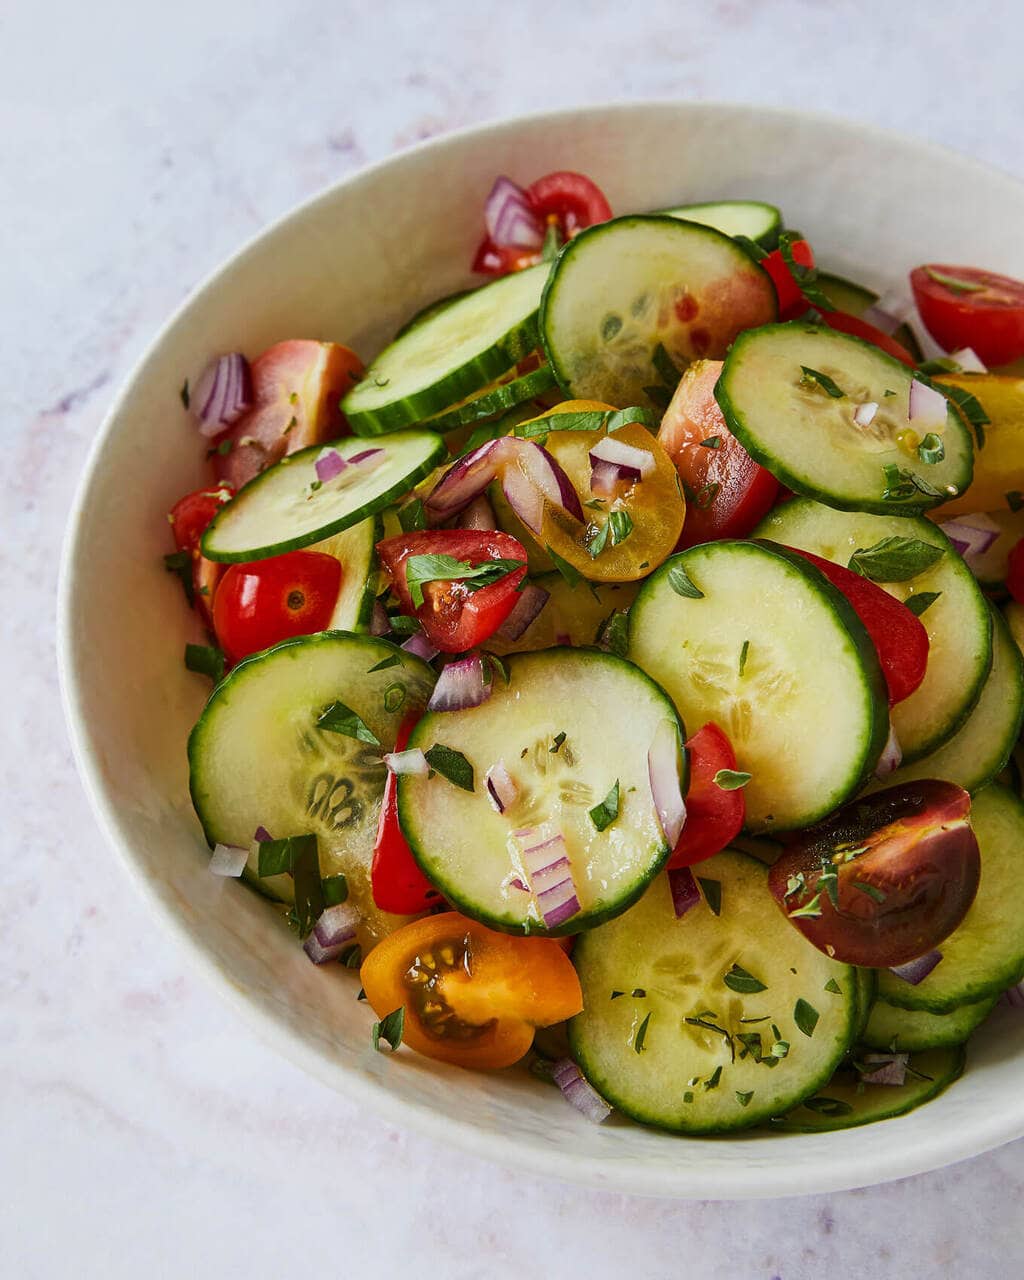 cucumber and tomato salad with lemon, herbs and red onion